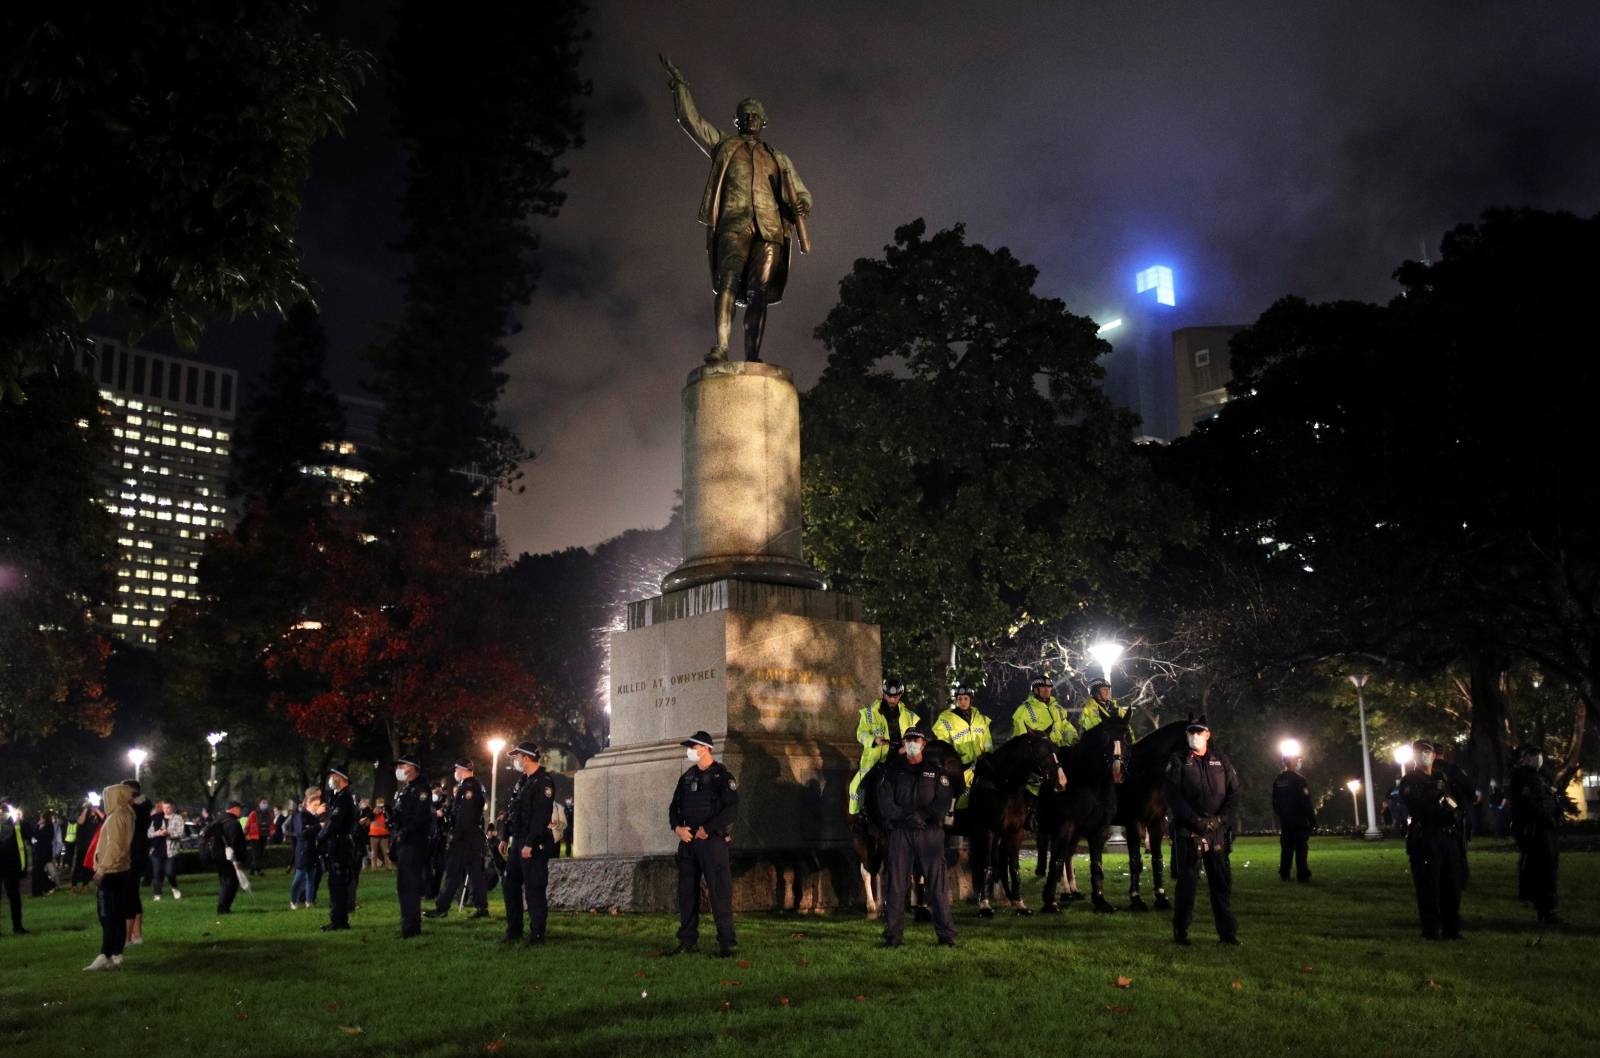 Police officers stand guard around the statue of British explorer Captain James Cook as they deter demonstrators from taking part in a protest in solidarity with the Black Lives Matter protests, in Sydney